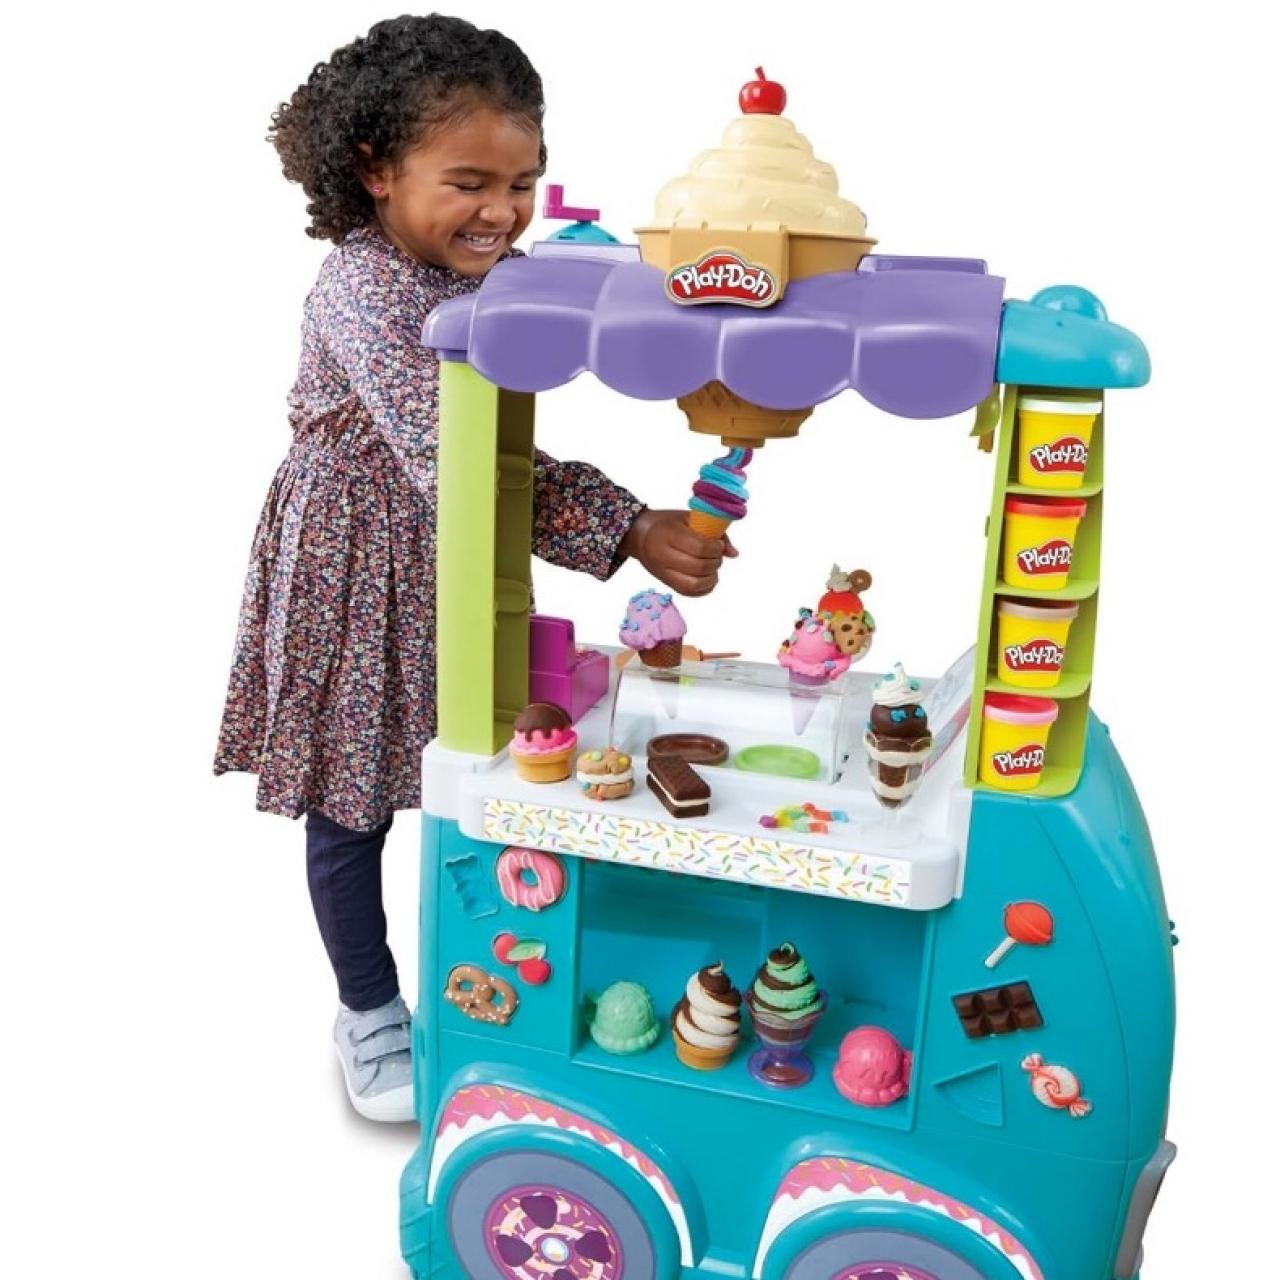 deAO Ice Cream Toy Play Store for Kids, Cash Register Toy Ice